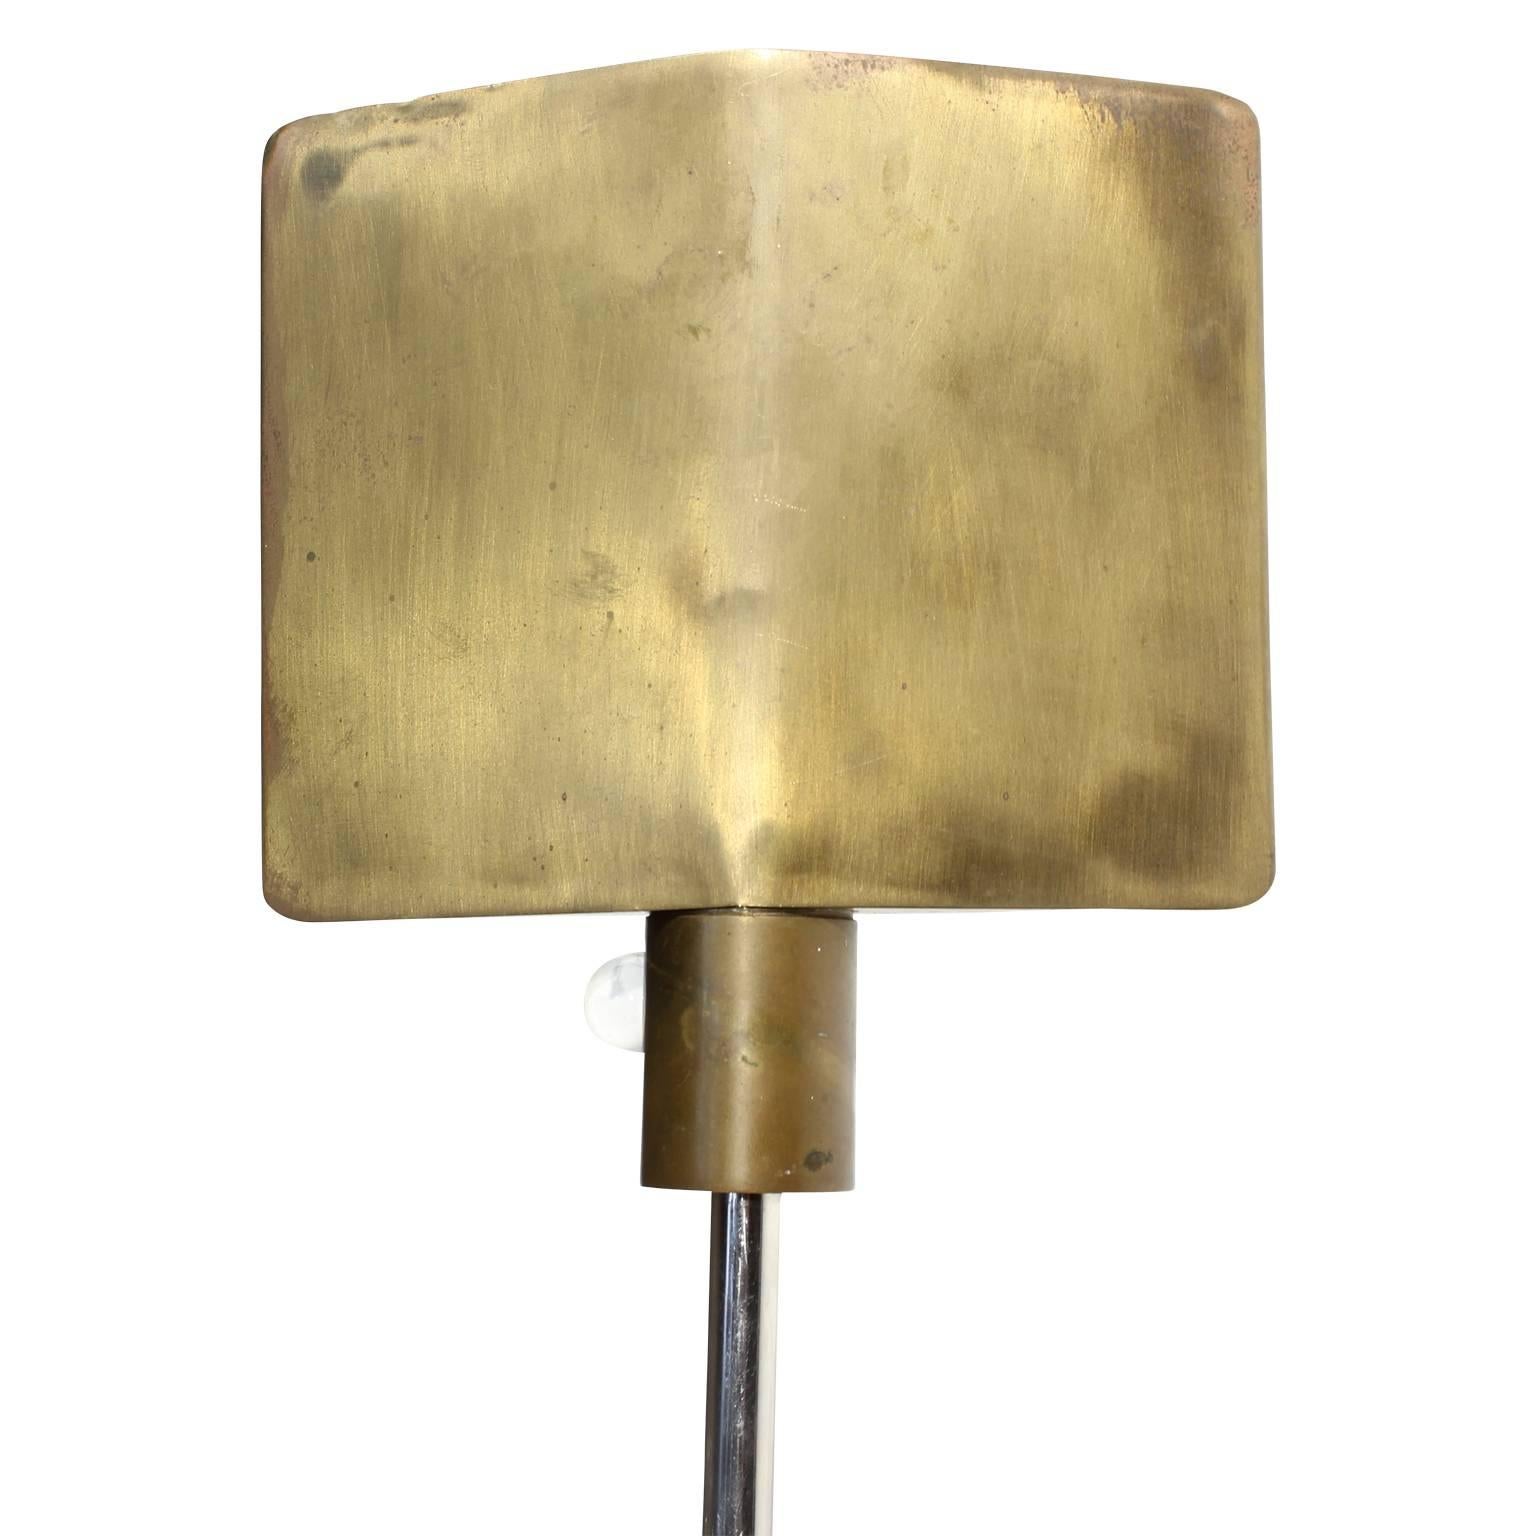 Late 20th Century Rare Signed Cedric Hartman Brass Floor Lamp with Glass Ball Switch